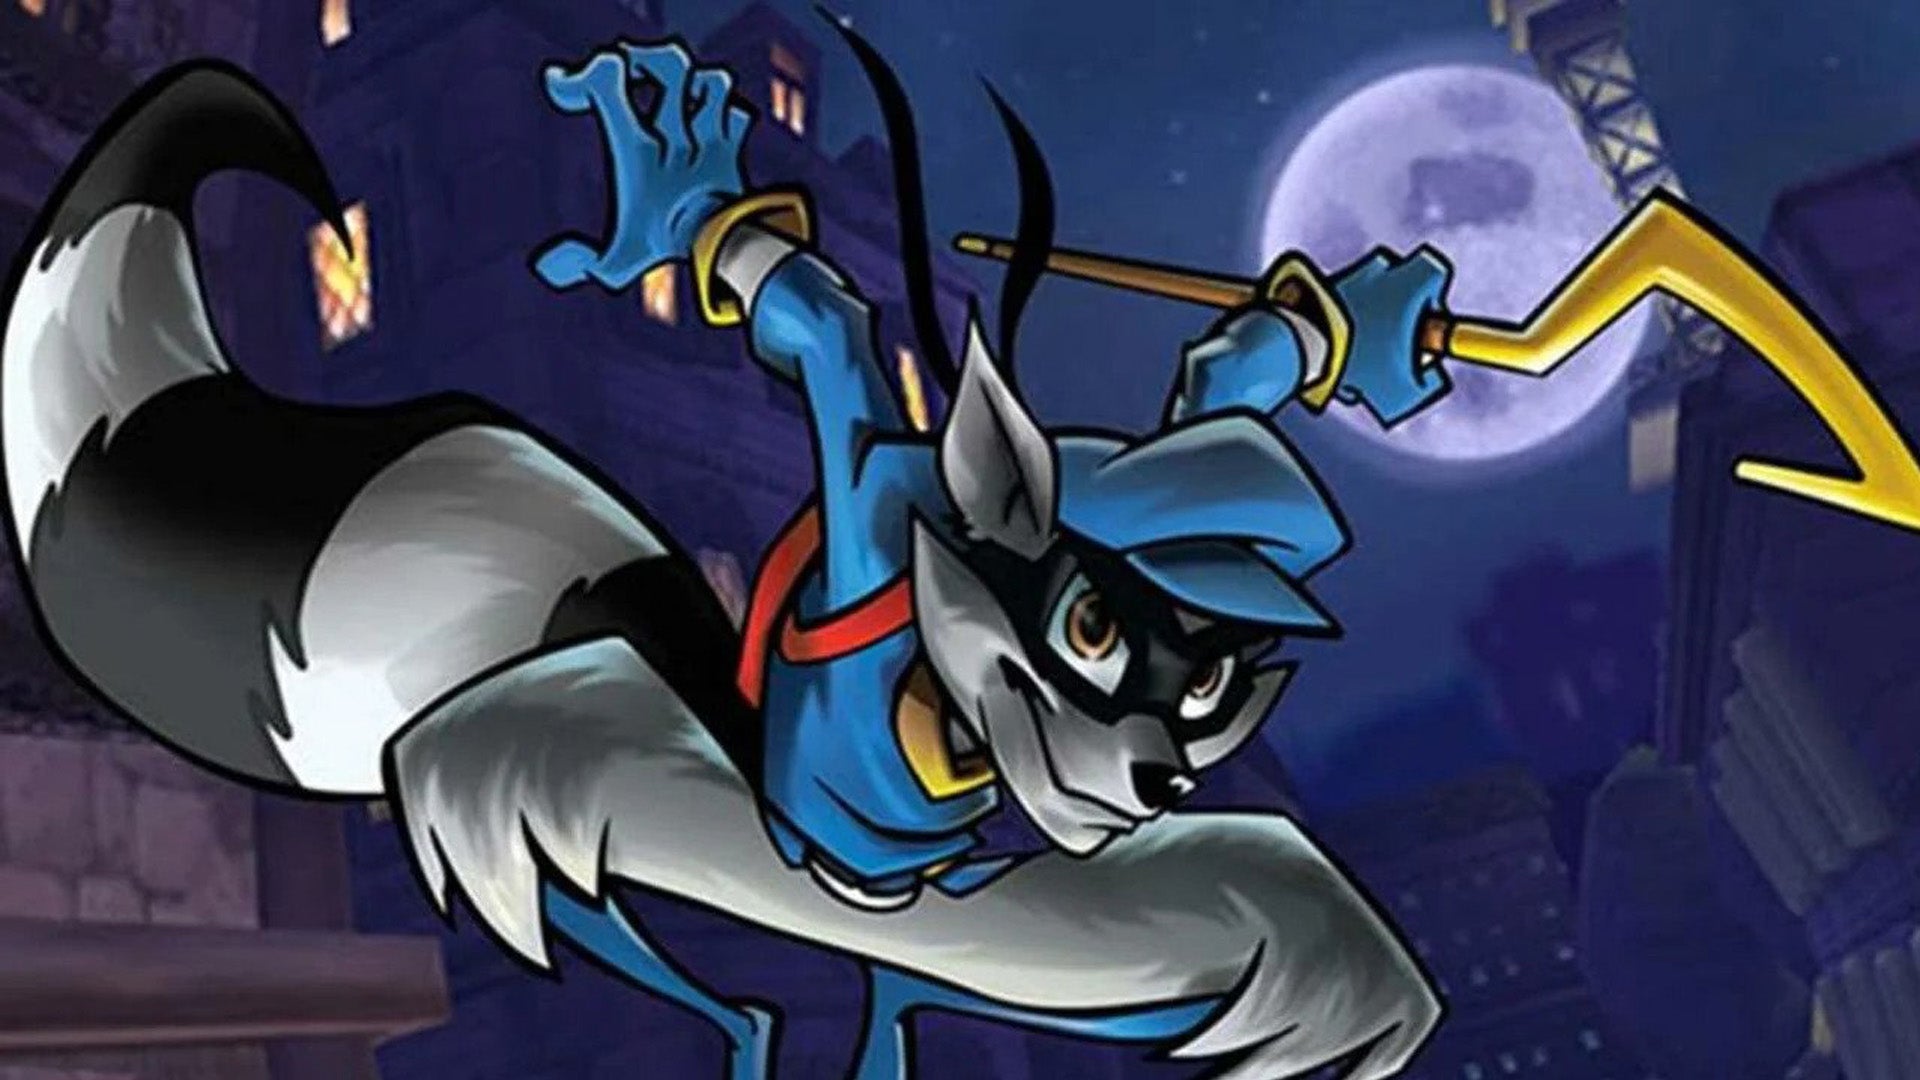 Art of Sly Cooper jumping down from a ledge looking into the camera.